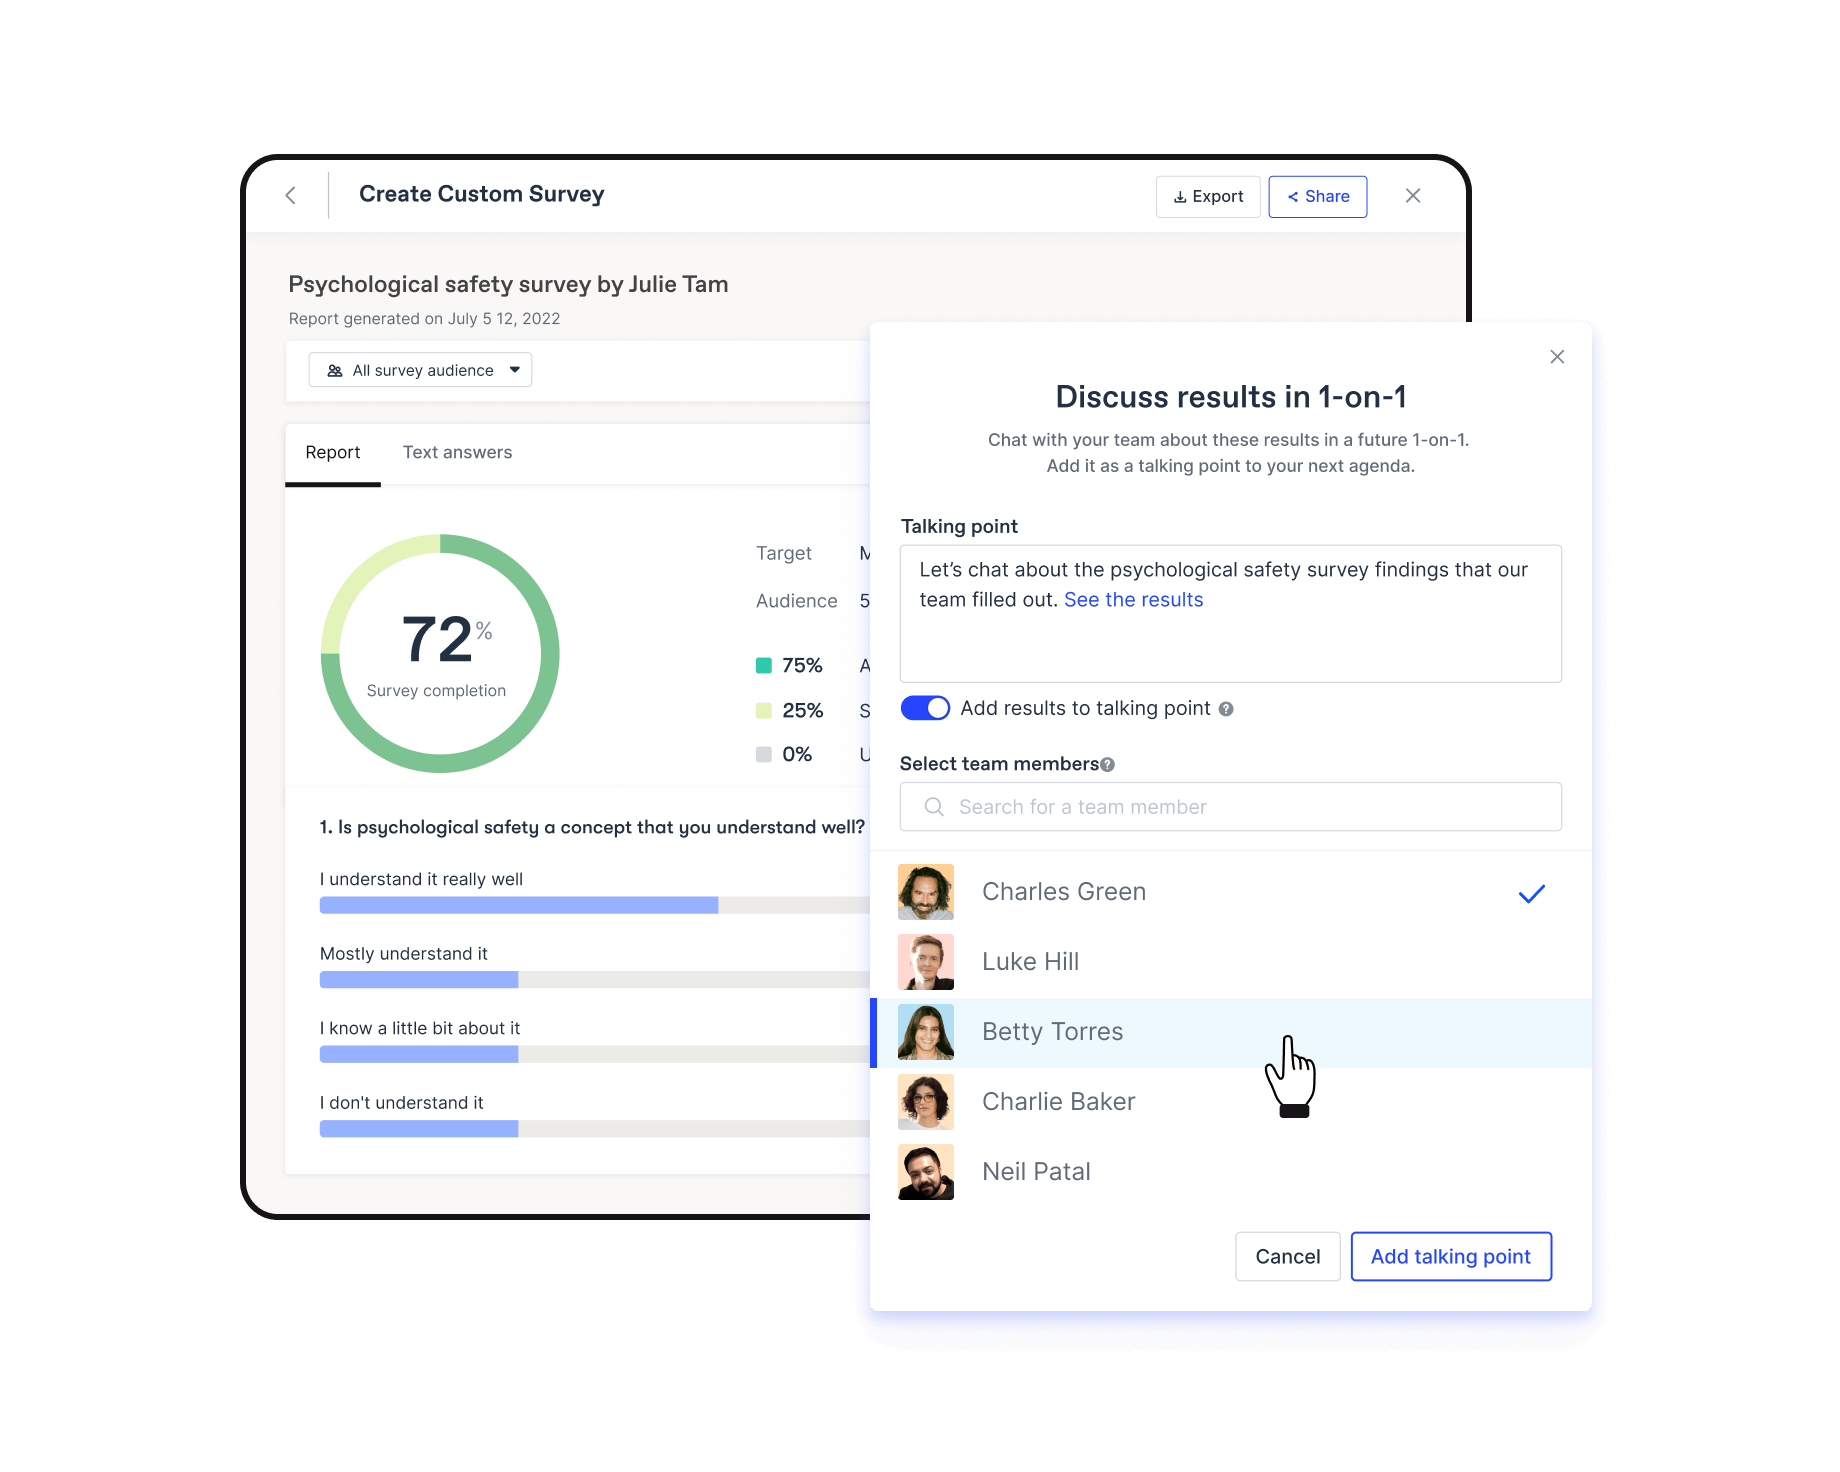 Officevibe custom survey results panel, allowing to add results as a talking point of a future 1-on-1 meeting with your team.